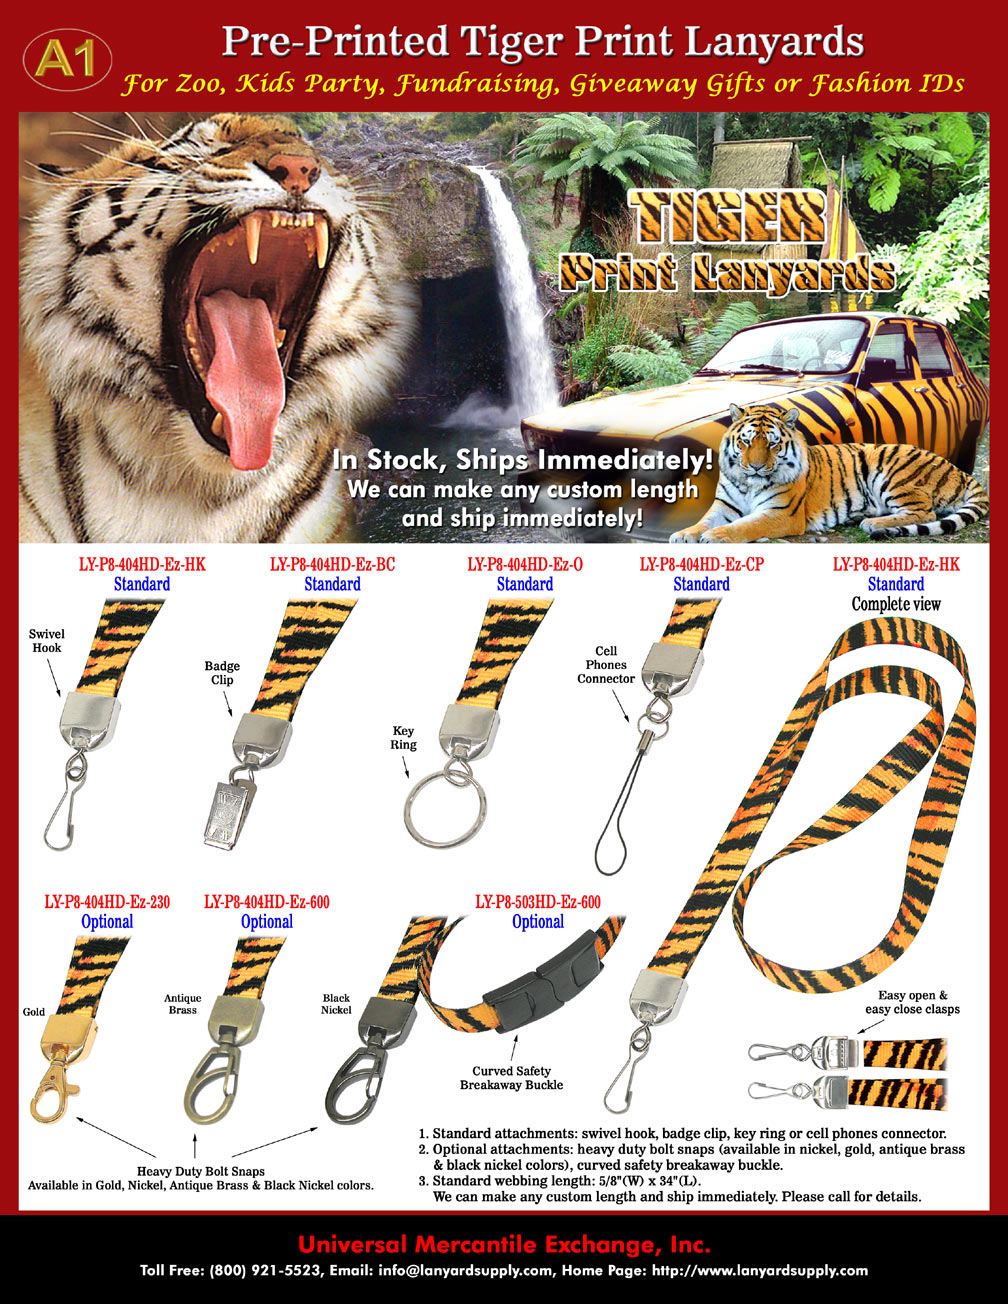 Luxurious Tiger Lanyards: Tiger Print Lanyards, Tiger Stripes or Patterns Printed Lanyards. Good For Zoo, Kids Party, Fundraising, Promotional Giveaway, Gifts or For Small Business Fashion Name Badges.